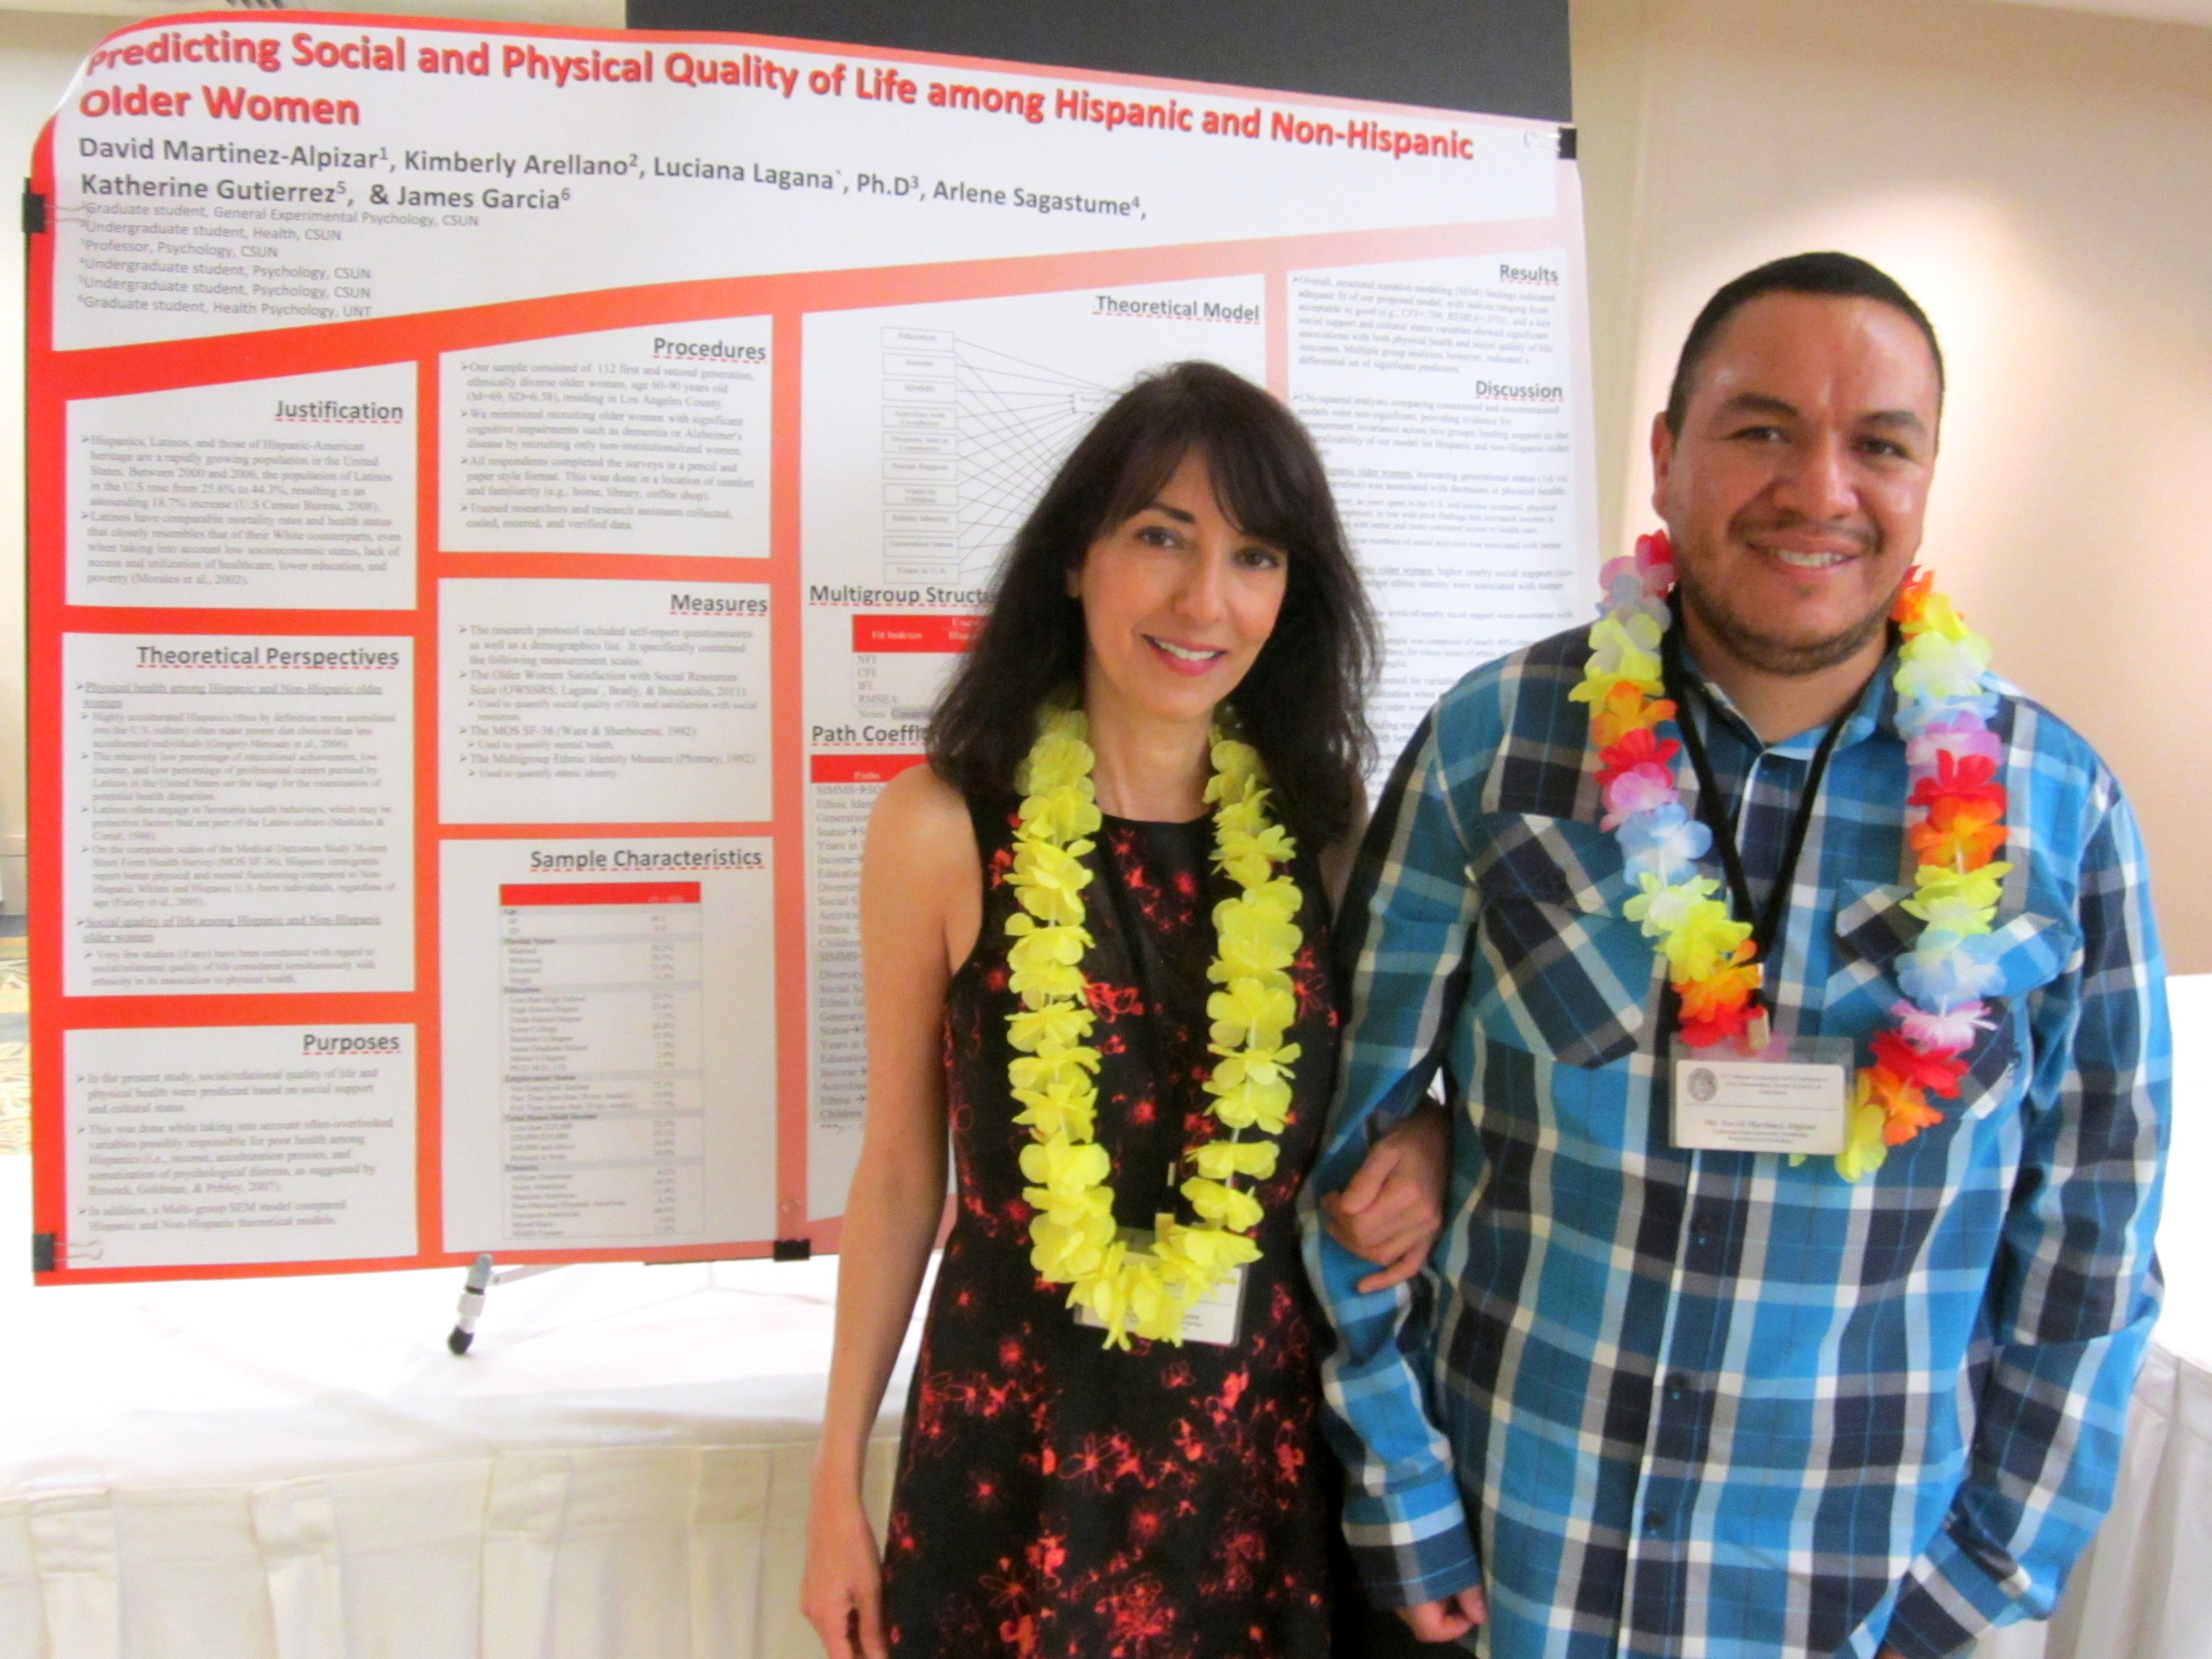 Prof. Luciana Lagana and the coordinator of her 'CSUN Behavioral Medicine Laboratory', David Martinez Alpizar, at a research conference event in Honolulu on 1/3/2015.